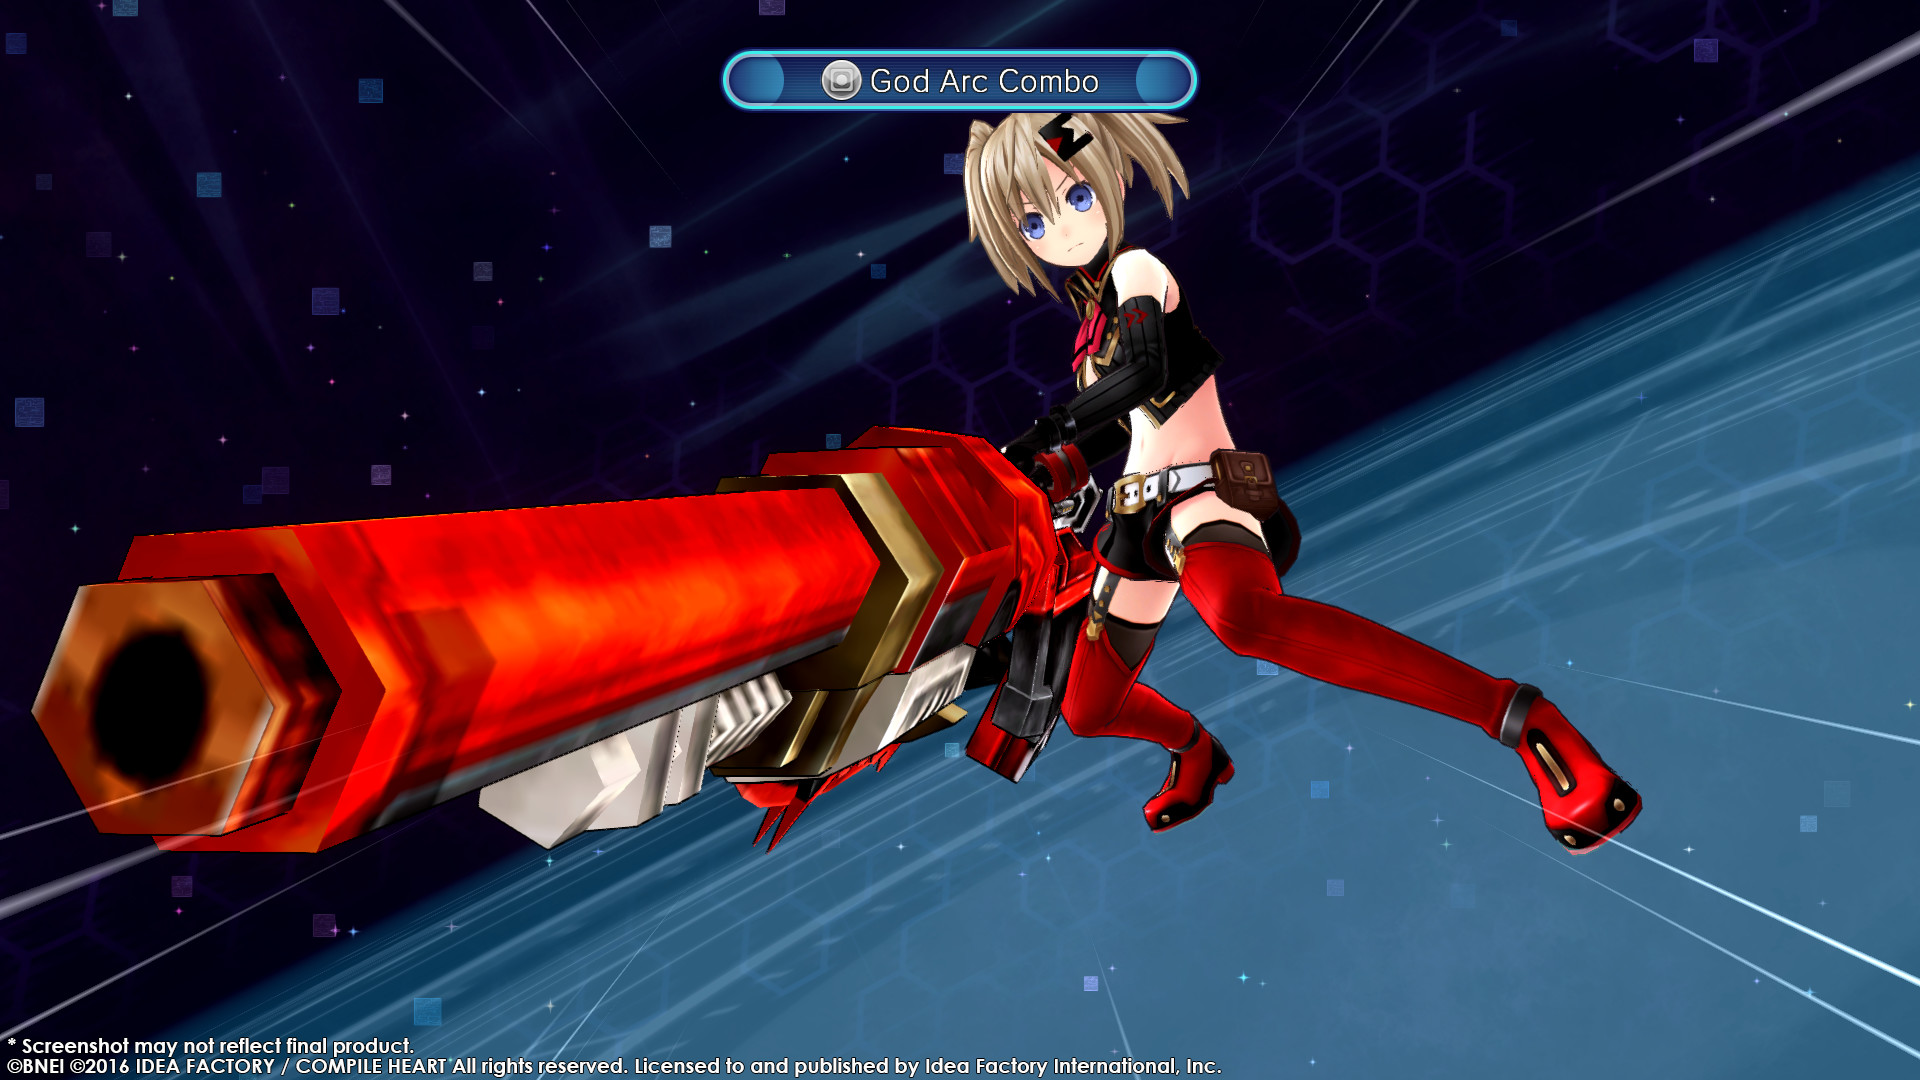 Megadimension Neptunia VII Party Character [God Eater] Featured Screenshot #1